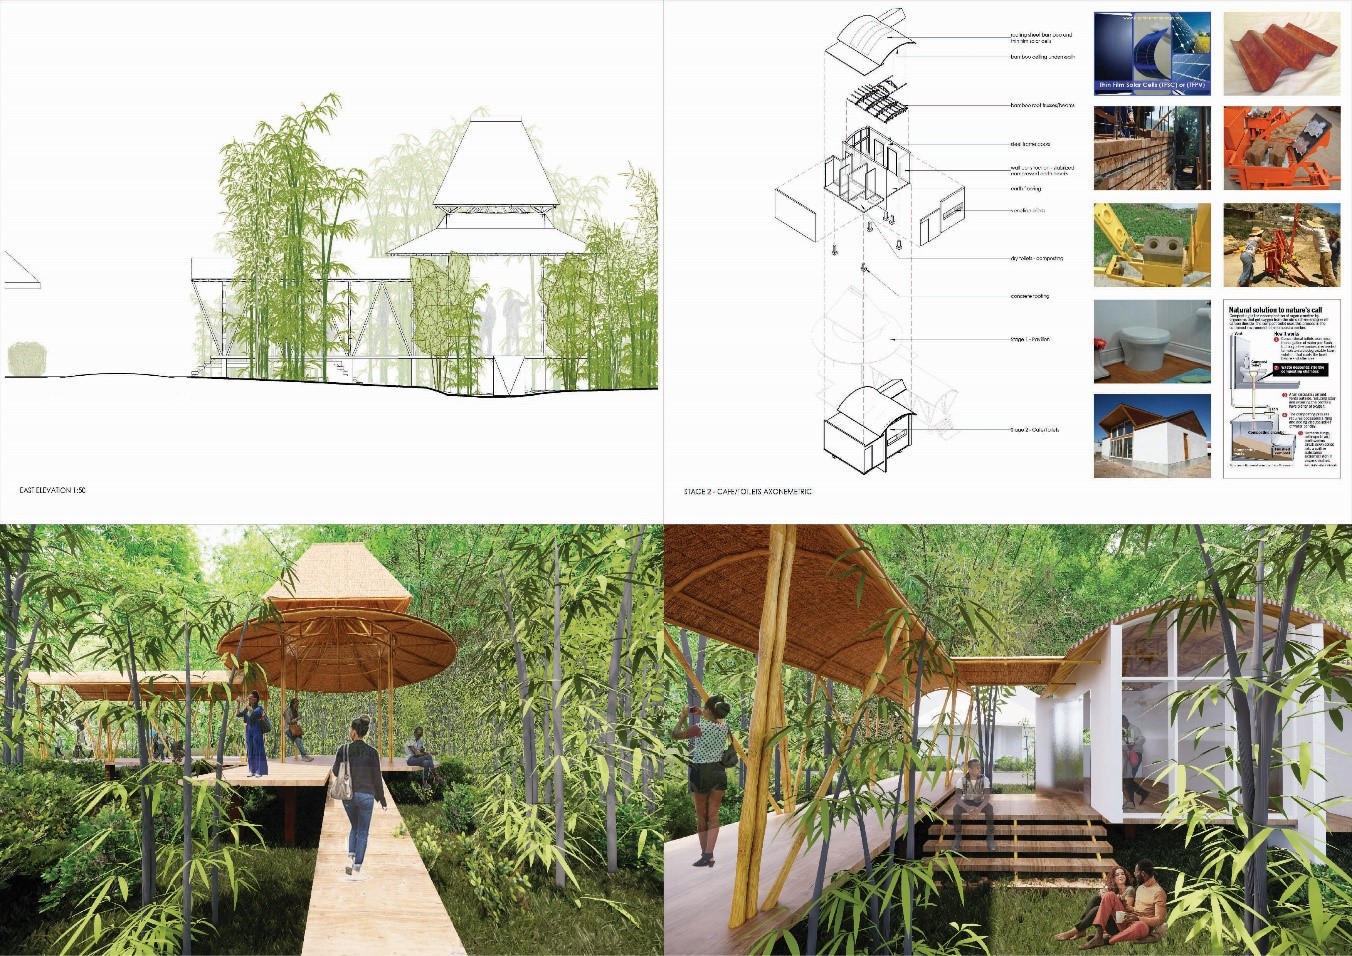 Drawn images and photos of bamboo based structures